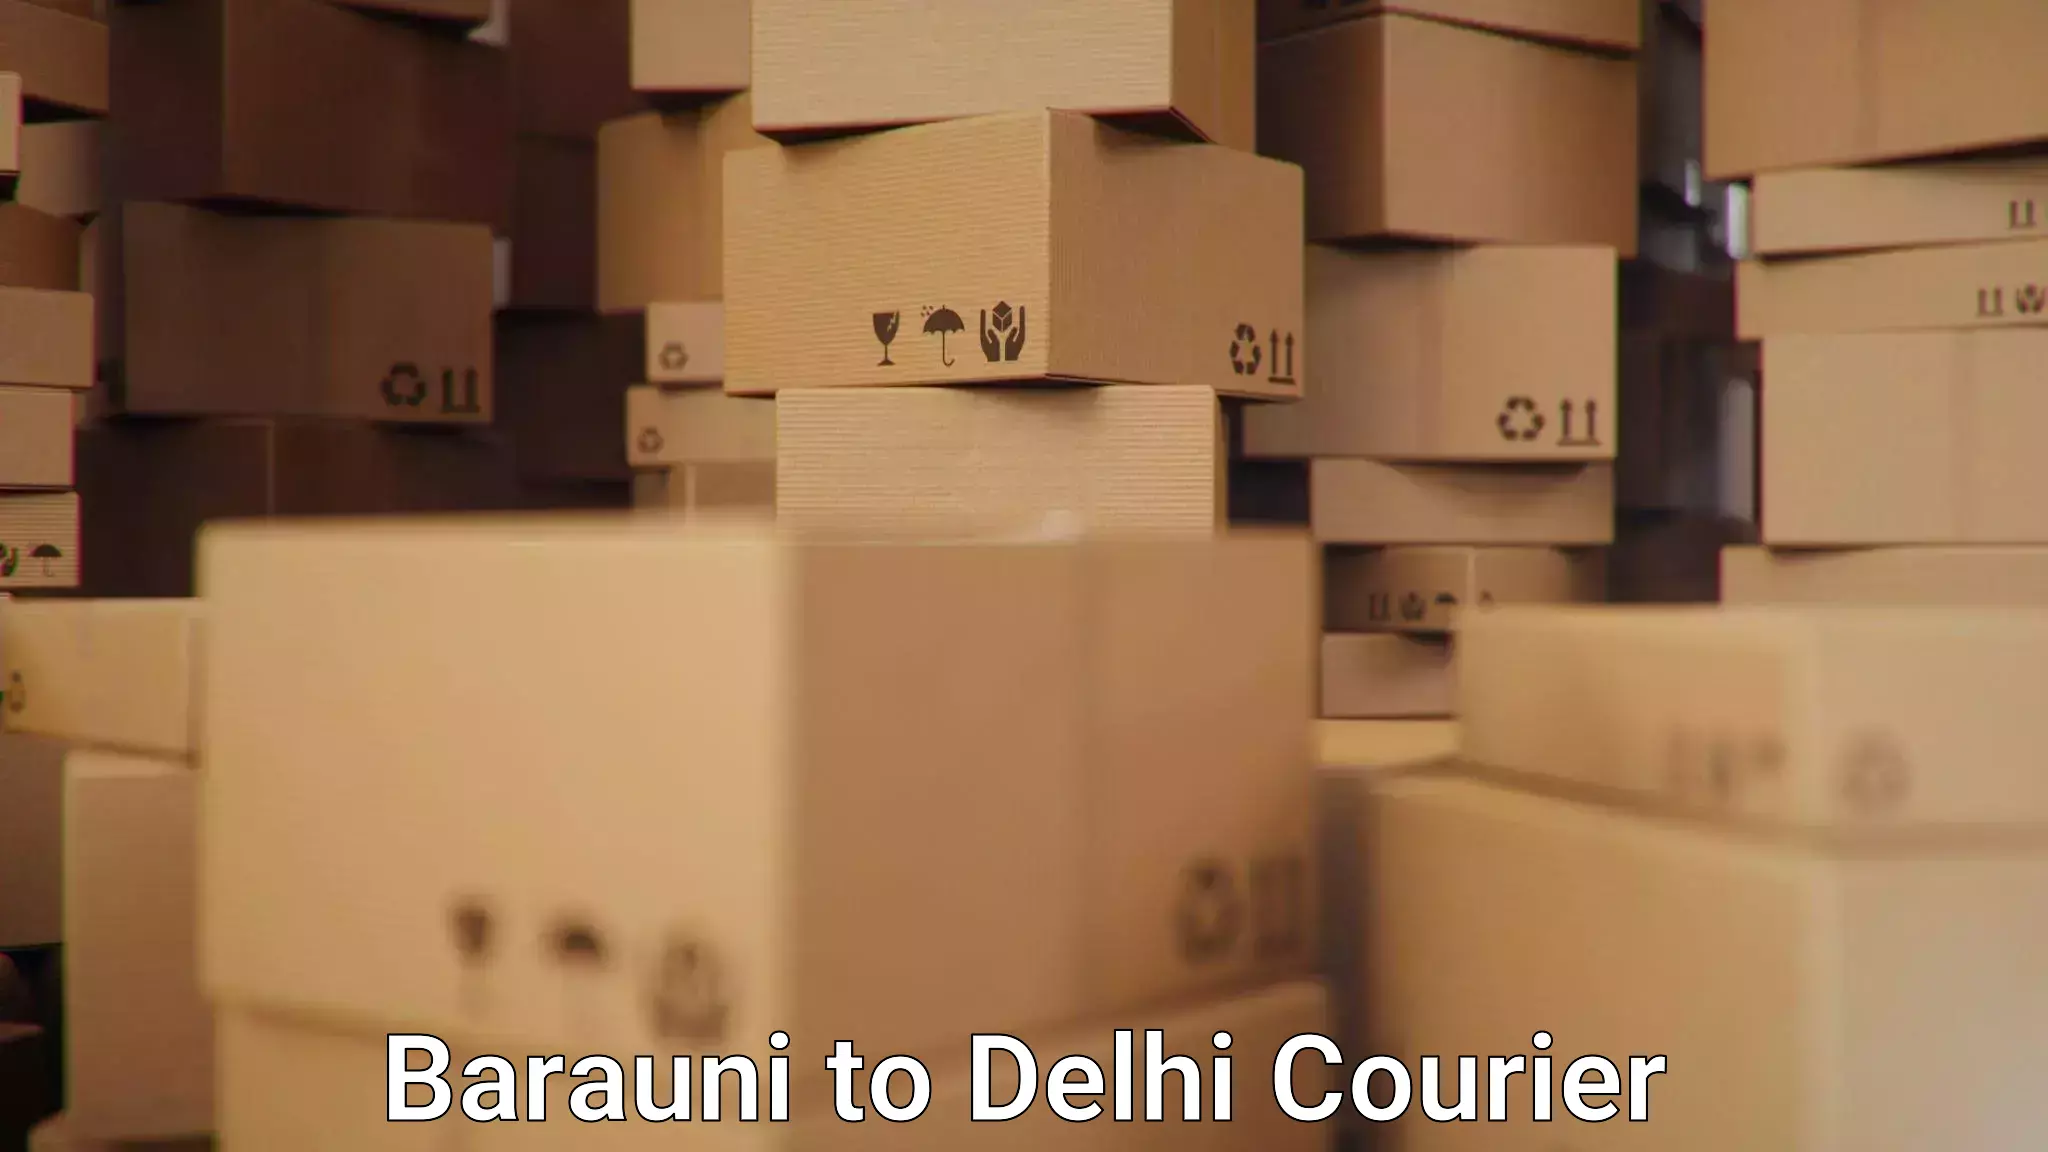 Package delivery network Barauni to East Delhi